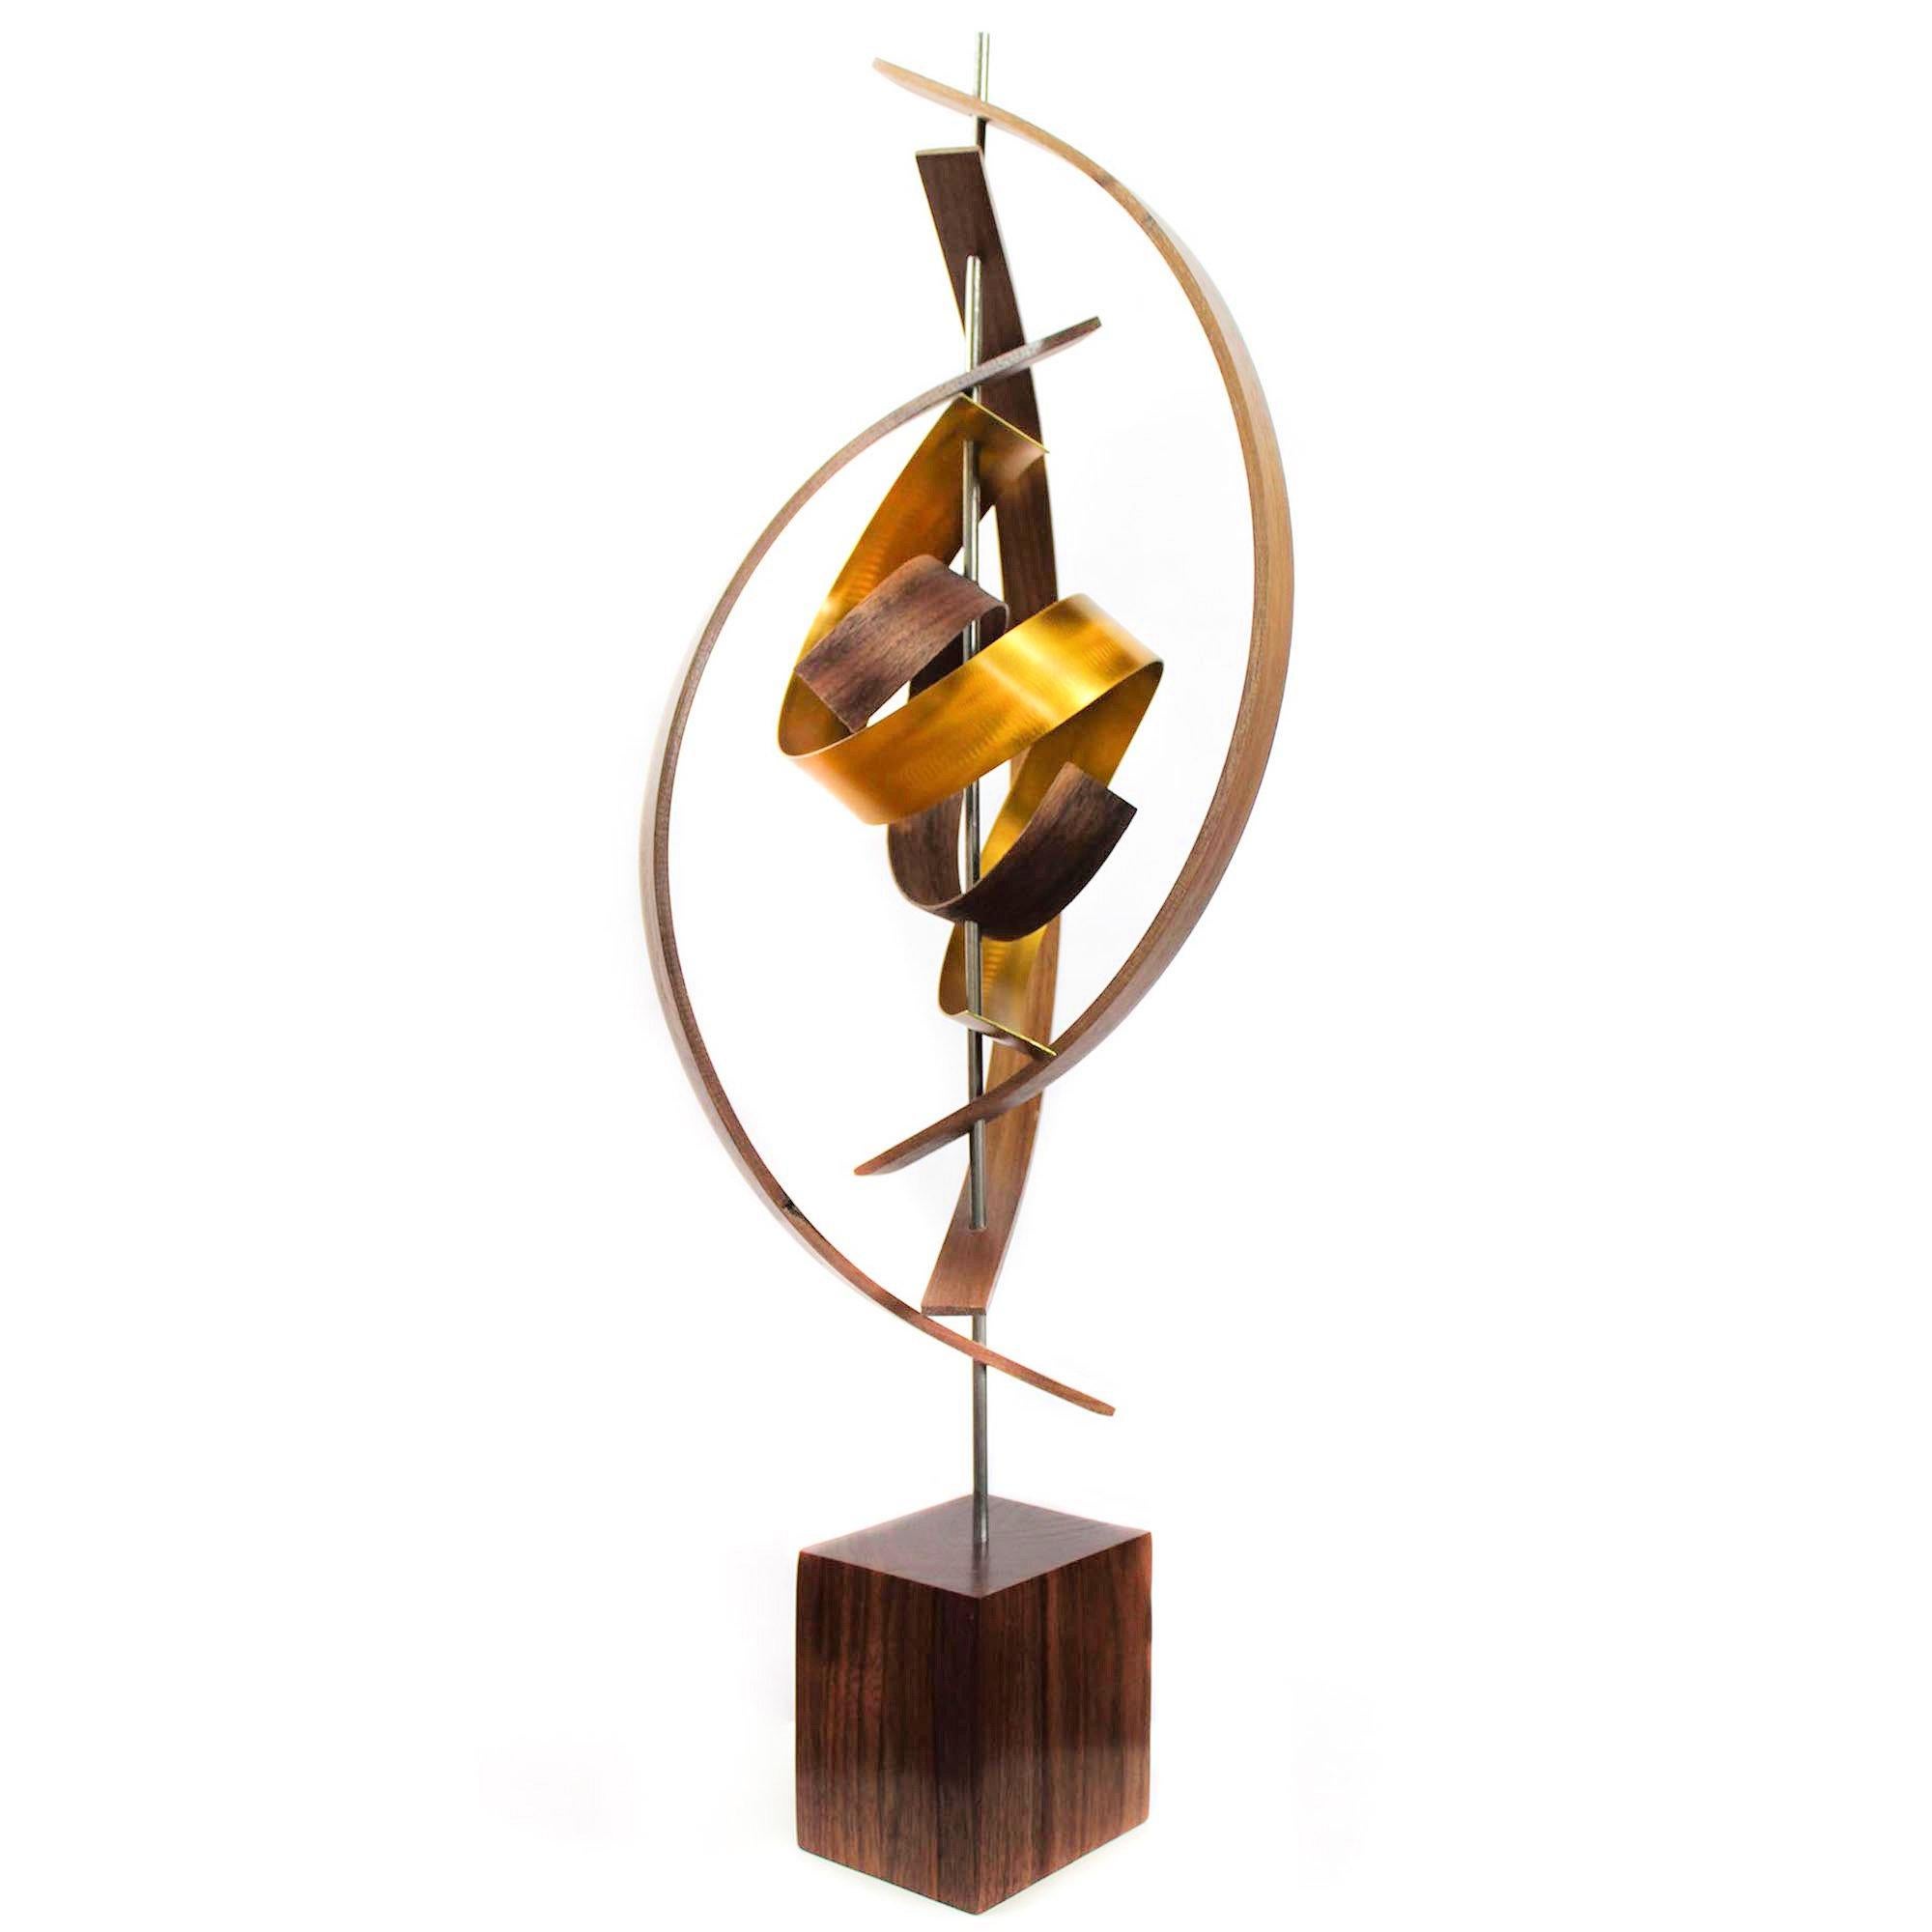 Description:  This sculpture consists of pre-formed black walnut and tinted aluminum with grind pattern. Solid cherry base. This sculpture is an open-edition multiple original; hand-made by the artist.
Title: Spiral

Artist Bio:
Jeff was born and